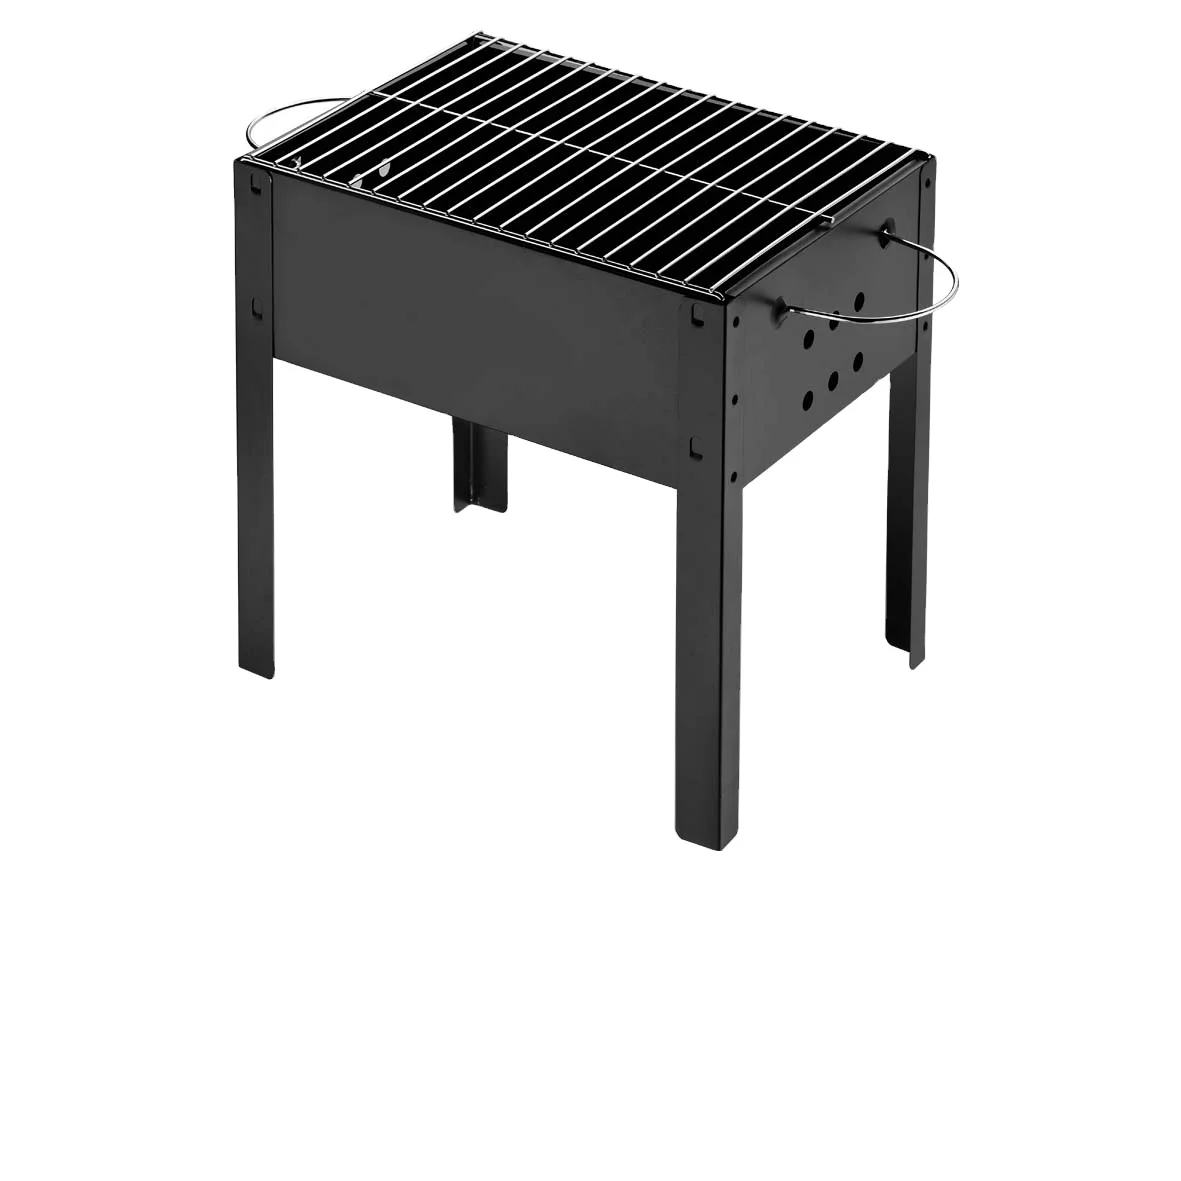 

Portable BBQ Charcoal Grill Folding Barbecue Grill for Outdoor Picnic, Patio, Backyard & Camping